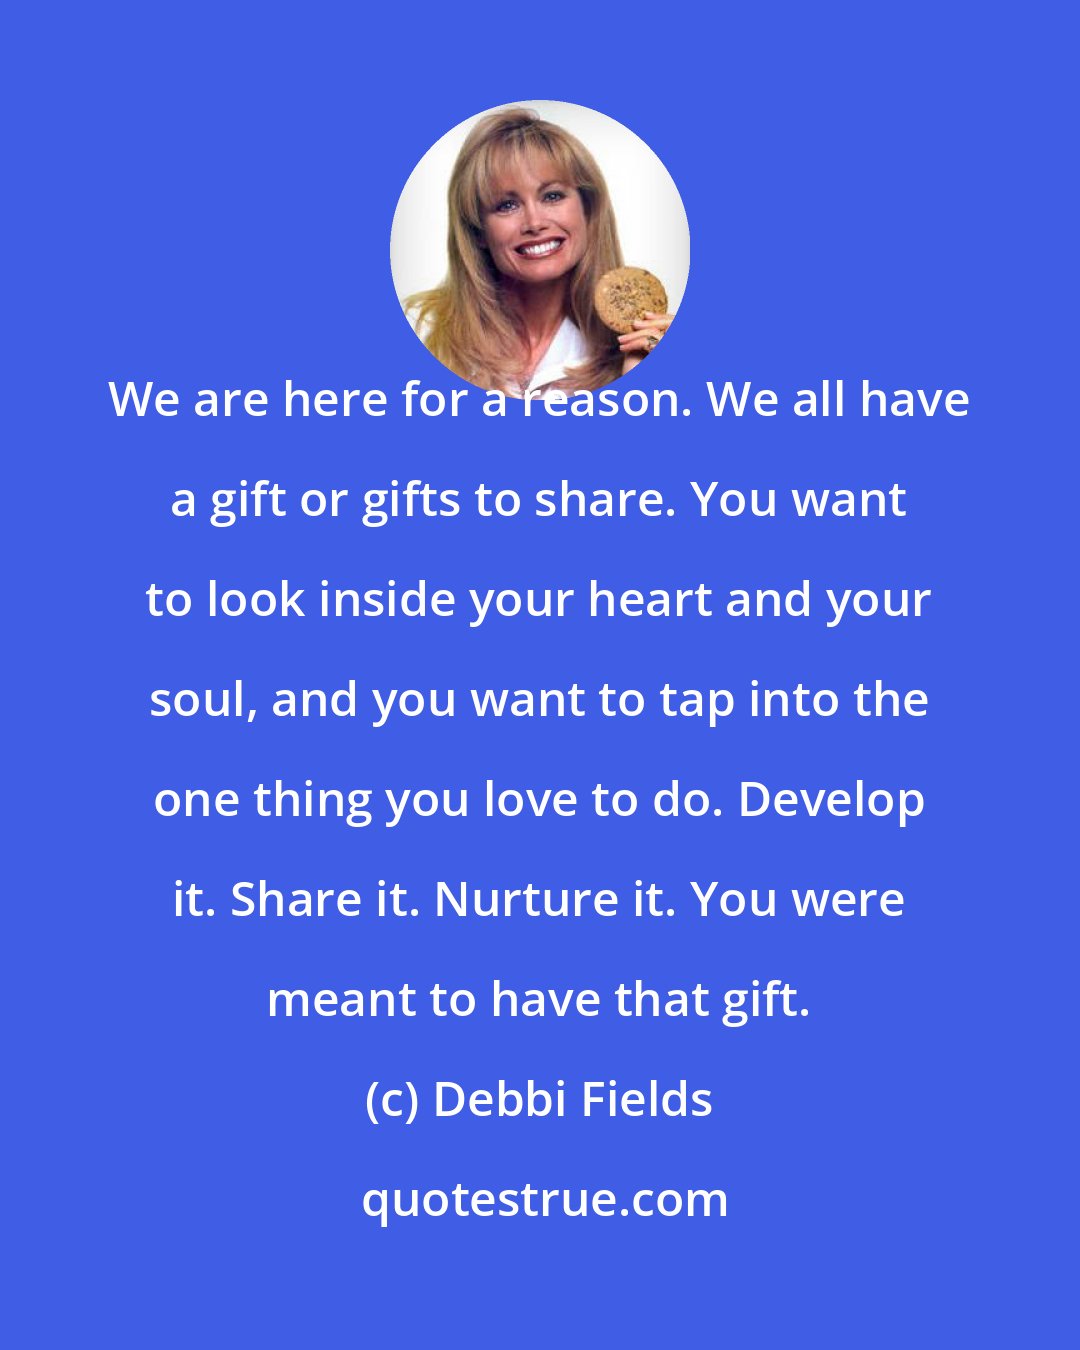 Debbi Fields: We are here for a reason. We all have a gift or gifts to share. You want to look inside your heart and your soul, and you want to tap into the one thing you love to do. Develop it. Share it. Nurture it. You were meant to have that gift.